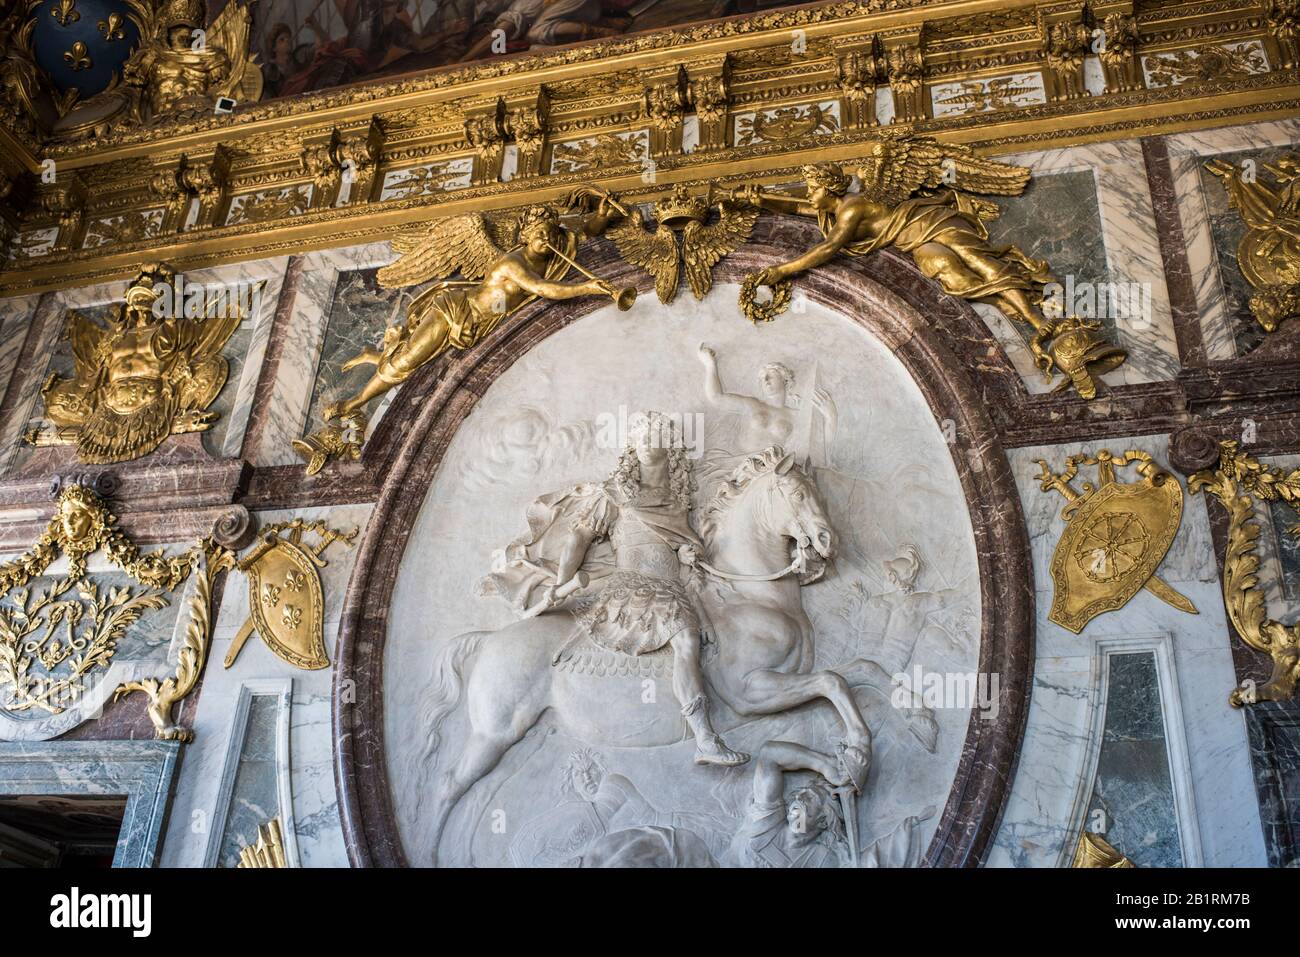 Versailles, France - July 10, 2019: Medallion showing KIng Louis XIV on horseback, The War Drawing Room, Palace of Versailles, France. Stock Photo